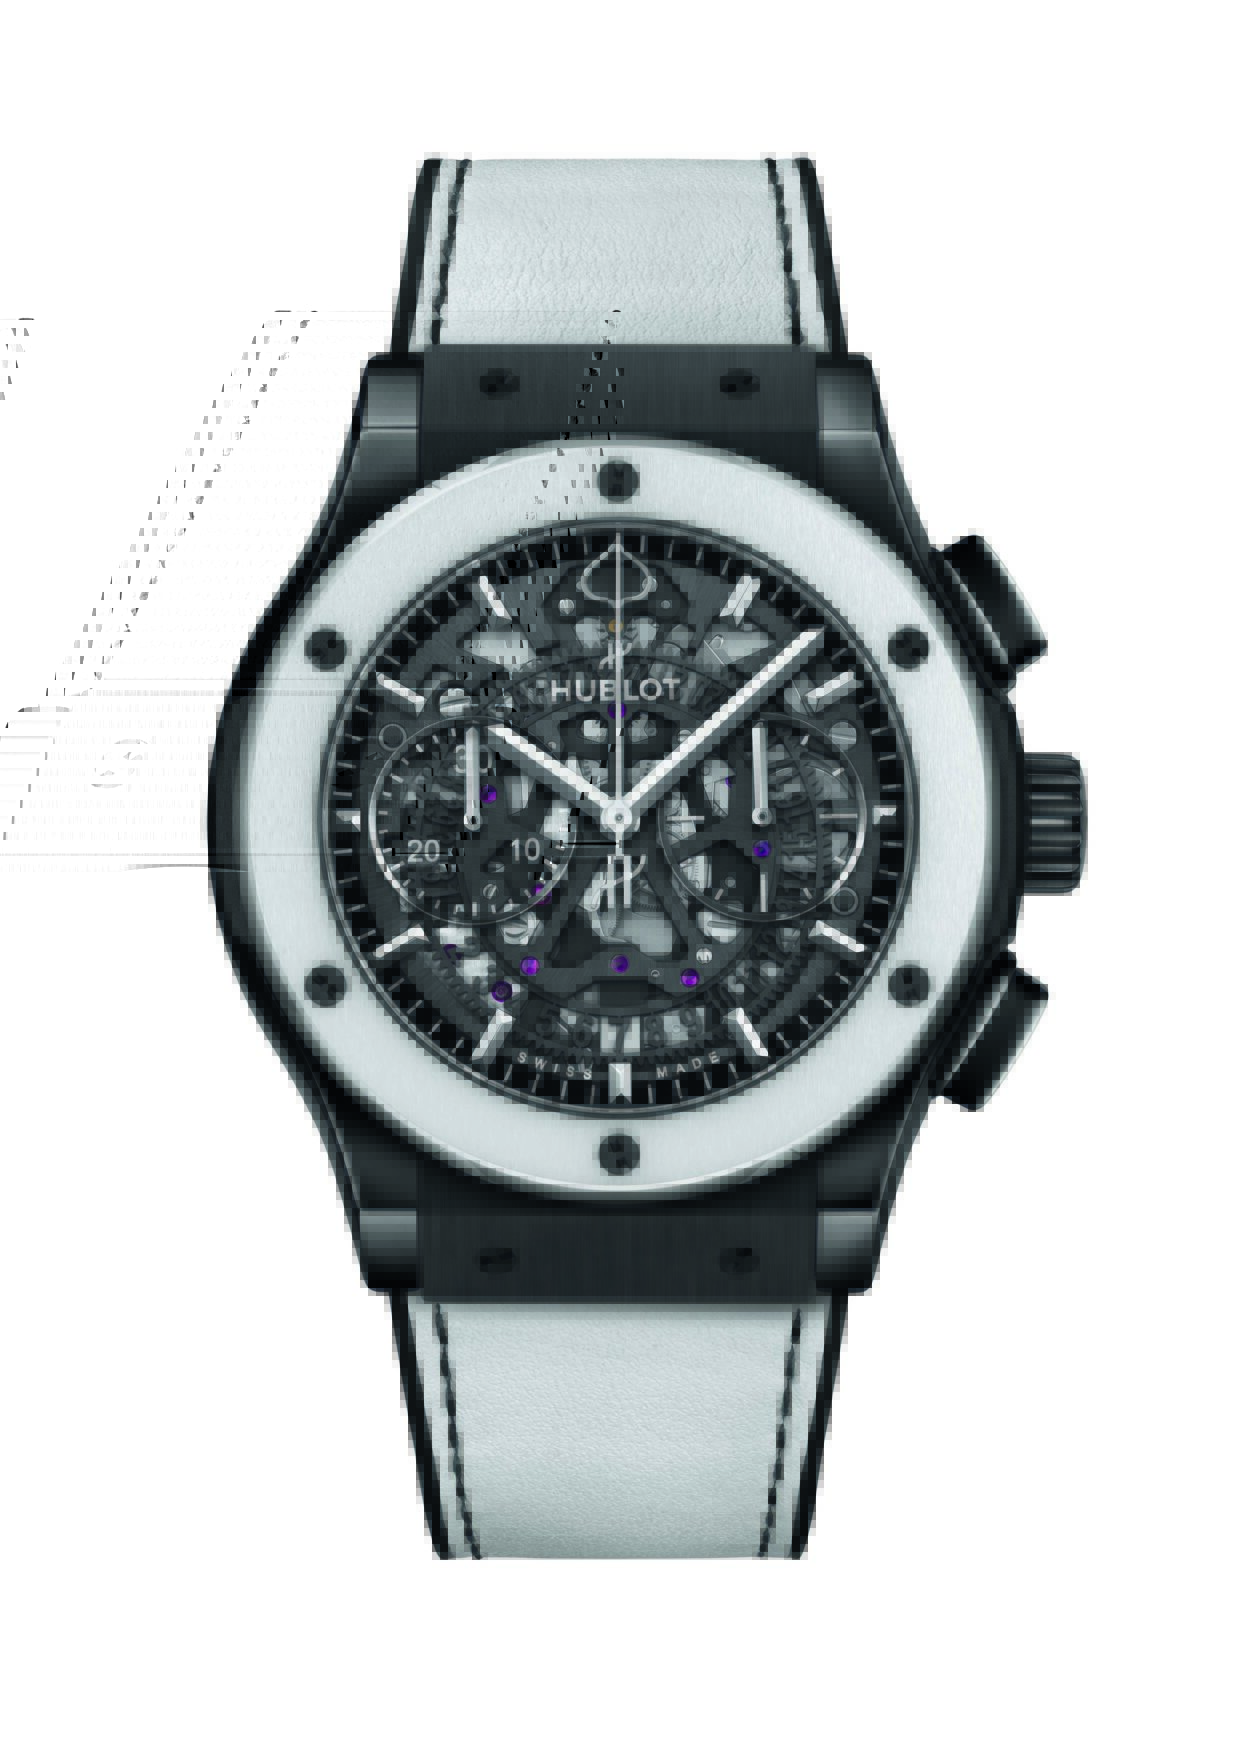 INTRODUCING: The Hublot Classic Fusion Aerofusion Aspen Snowmass Limited Edition